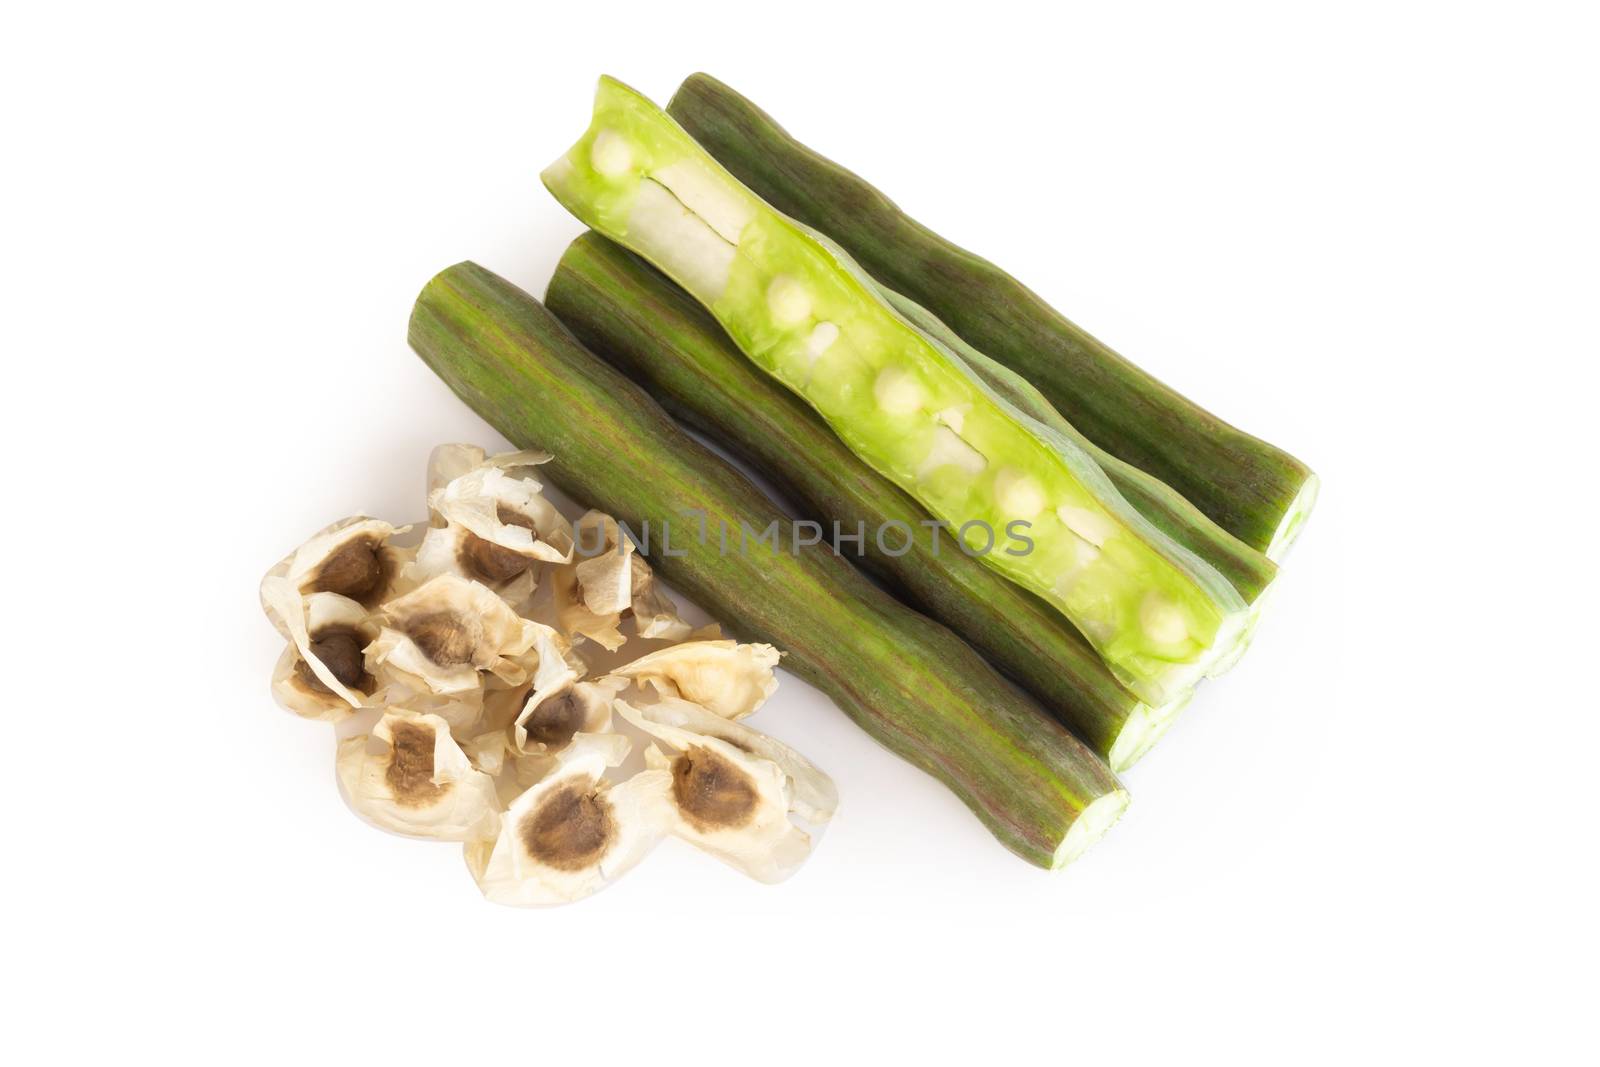 Moringa seeds and pods isolated on white background, herb and me by pt.pongsak@gmail.com